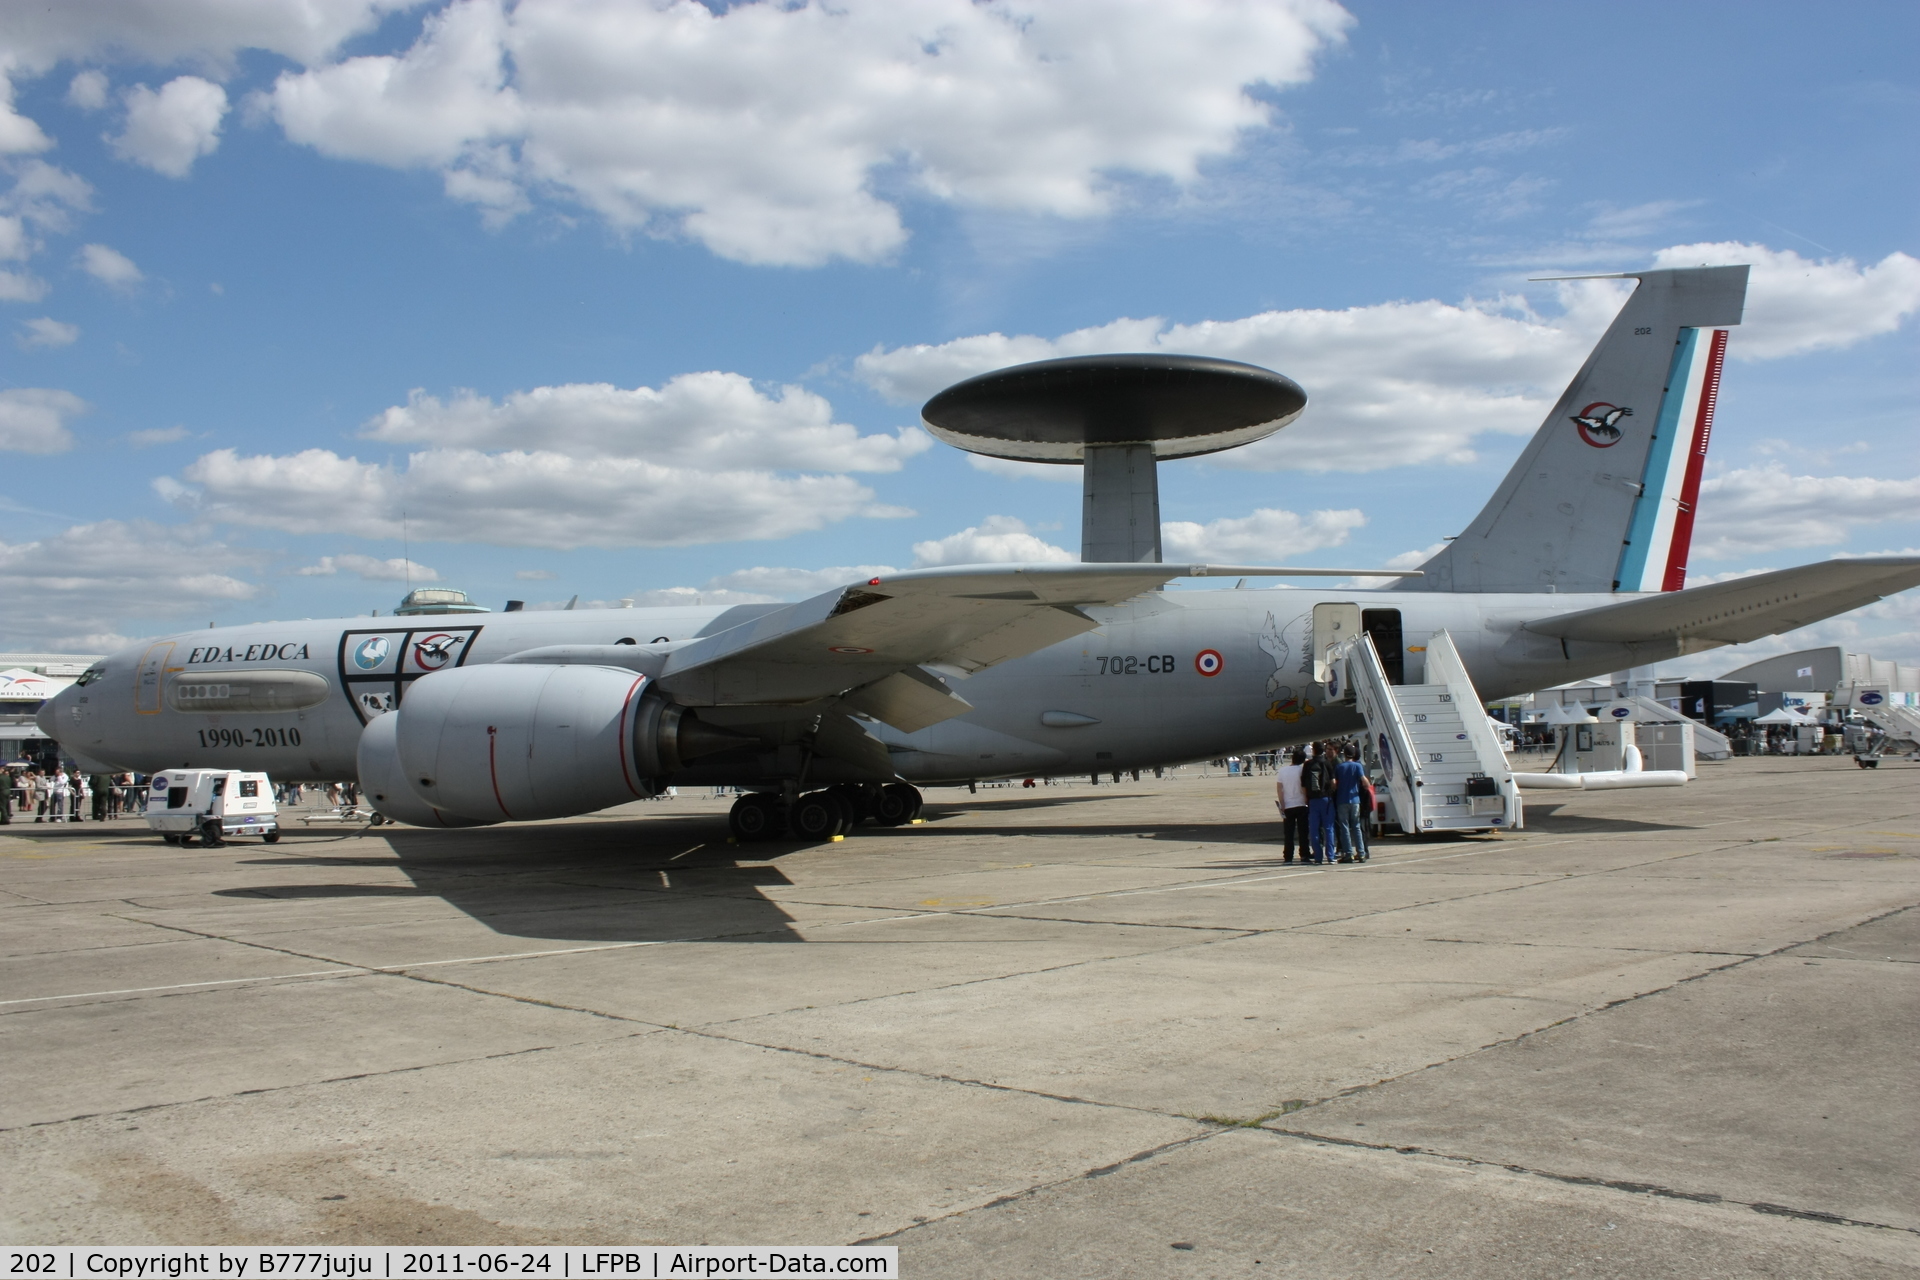 202, 1990 Boeing E-3F (707-300) Sentry C/N 24116, on display at SIAE 2011 with spesial peint for 20 years of E-3F